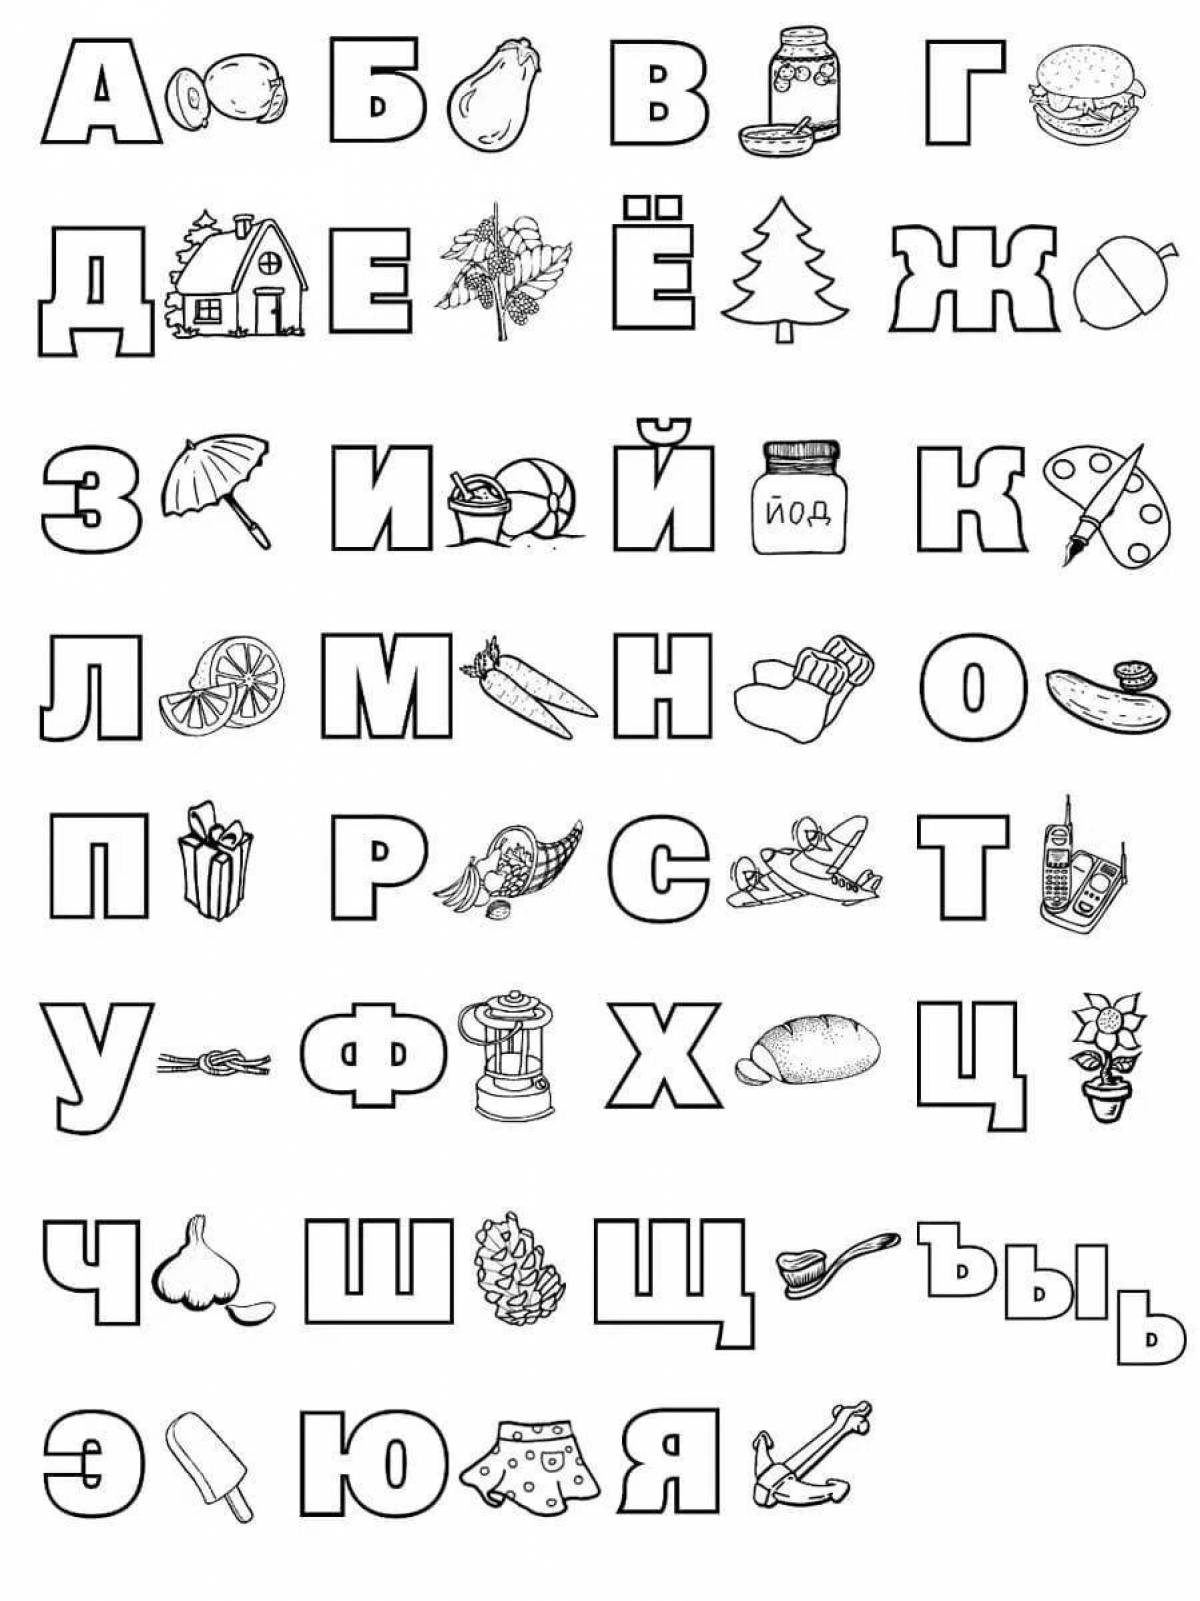 Coloring big Russian letter